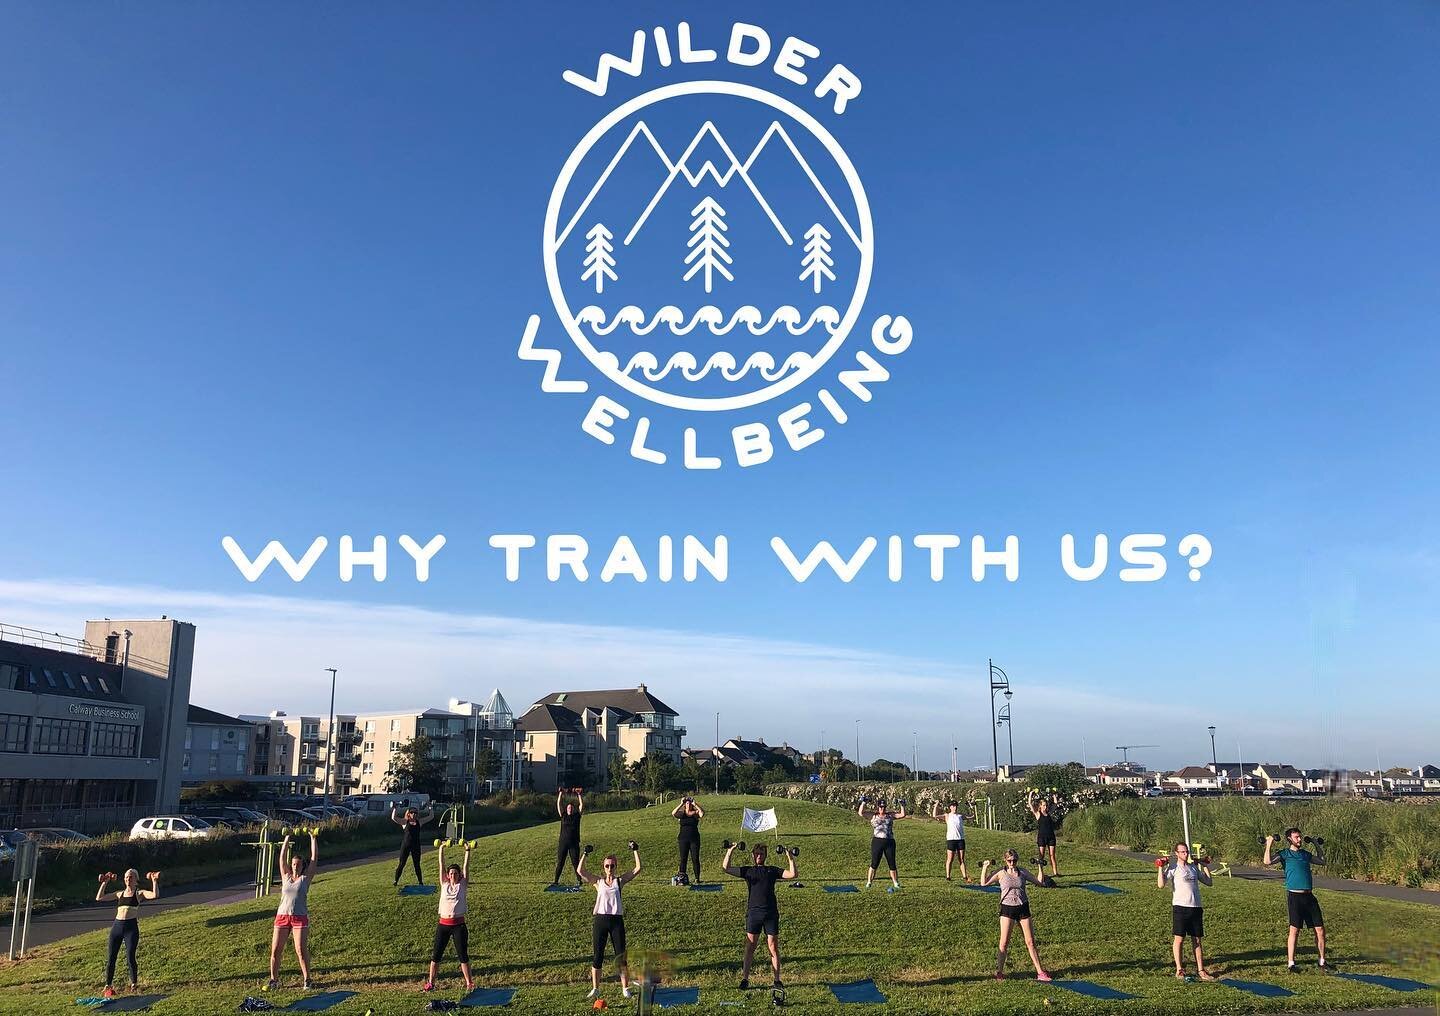 ***Why Train with Wilder Wellbeing***

💪 Increased Lean Muscle 💪

✅ Boost Metabolism ✅

🔥 Burn Fat &amp; Lose Weight 🔥

🫀Increase Cardiovascular &amp; Anaerobic Endurance🫀 

🧘&zwj;♀️Improved Mental Wellbeing 🧘&zwj;♀️

🌲 Reduced Stress 🌲 

?